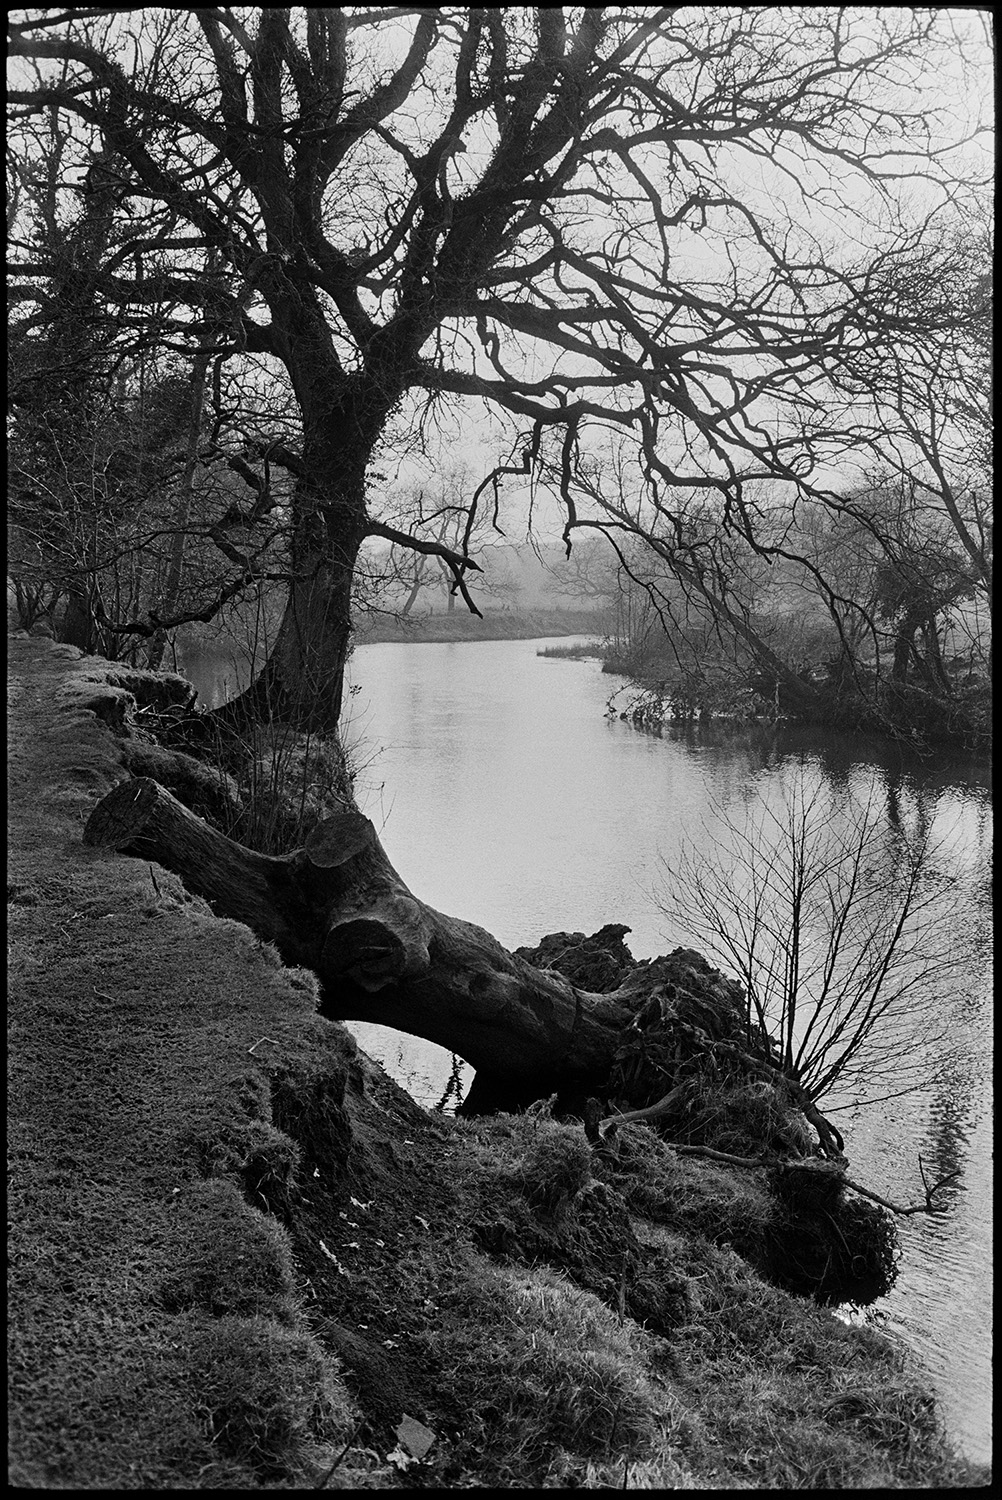 Collapsed river bank with tree. 
[A tree trunk which has collapsed into the River Torridge, along with part of the river bank, at Lower Langham, Dolton.]